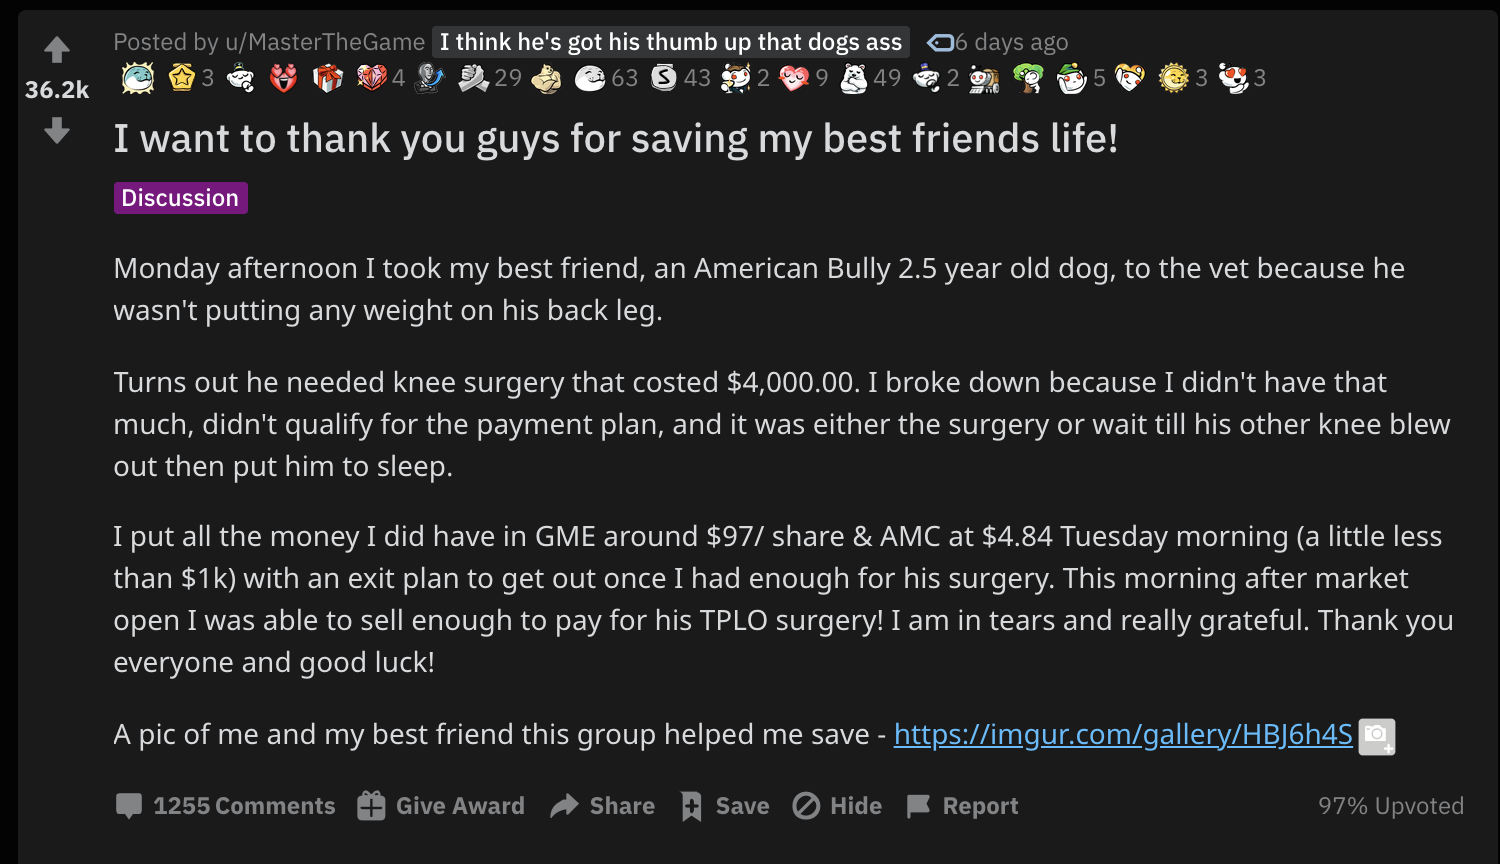 The WallStreetBets GameStop Hype Helped This Guy Save His Dog's Life